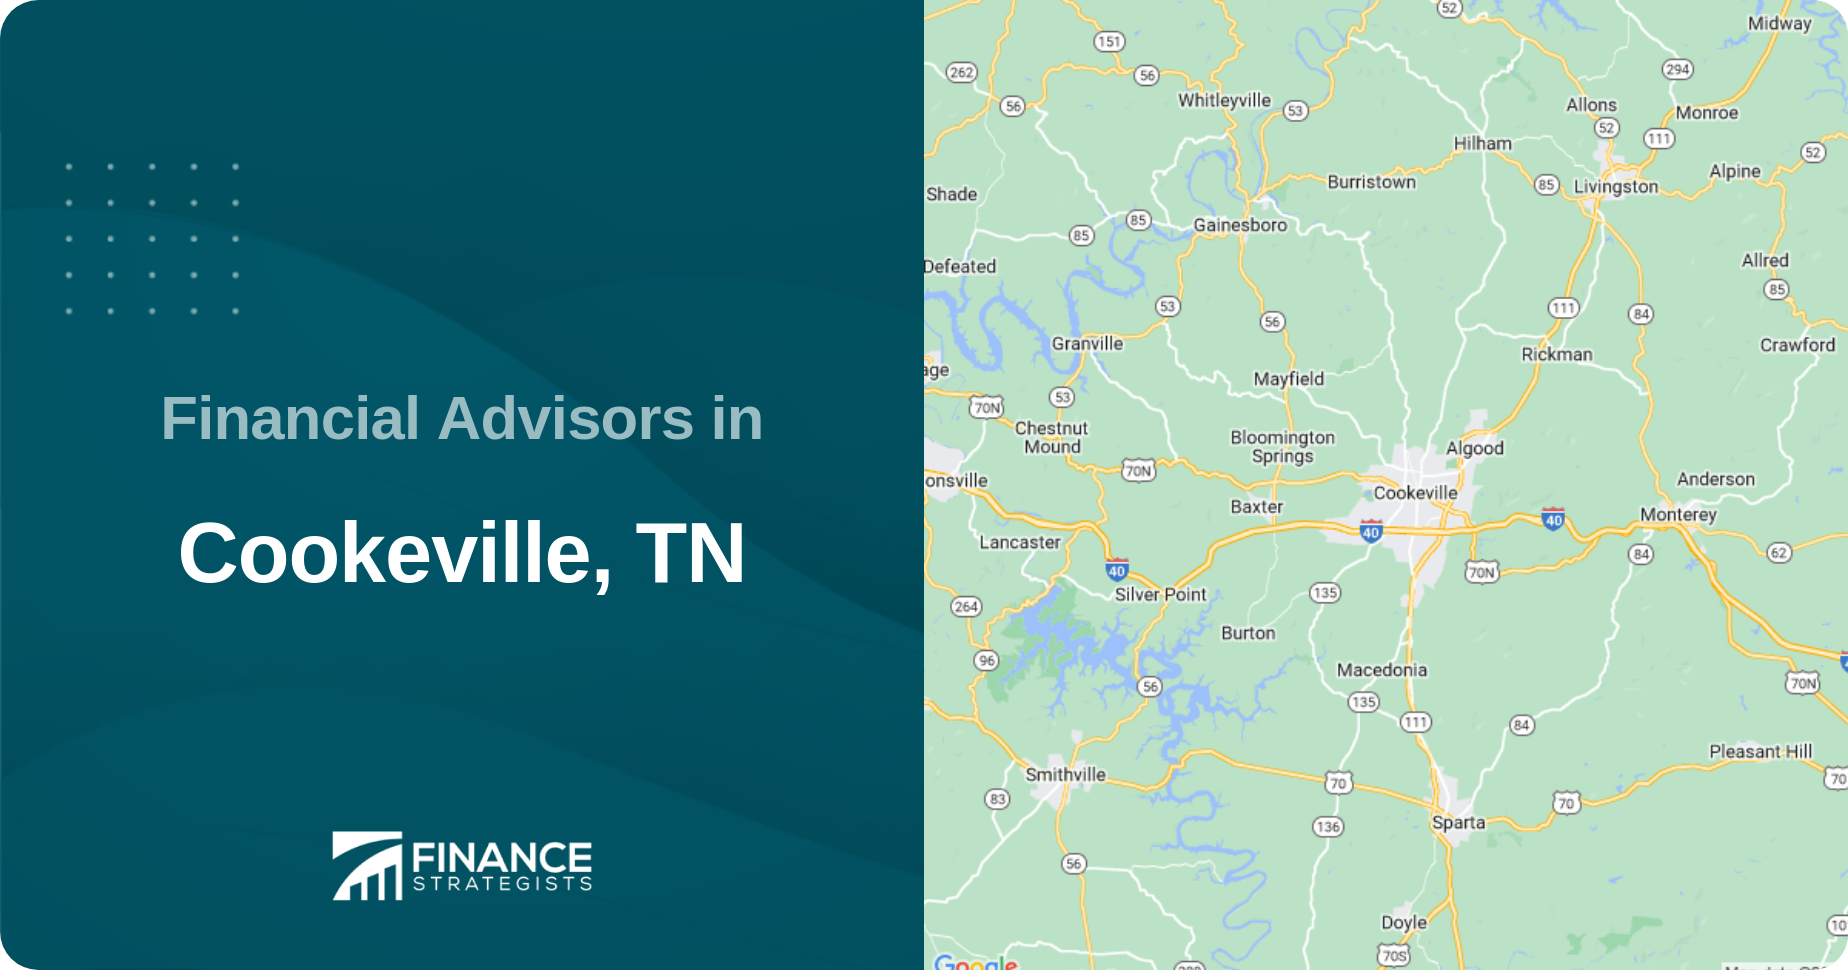 Financial Advisors in Cookeville, TN